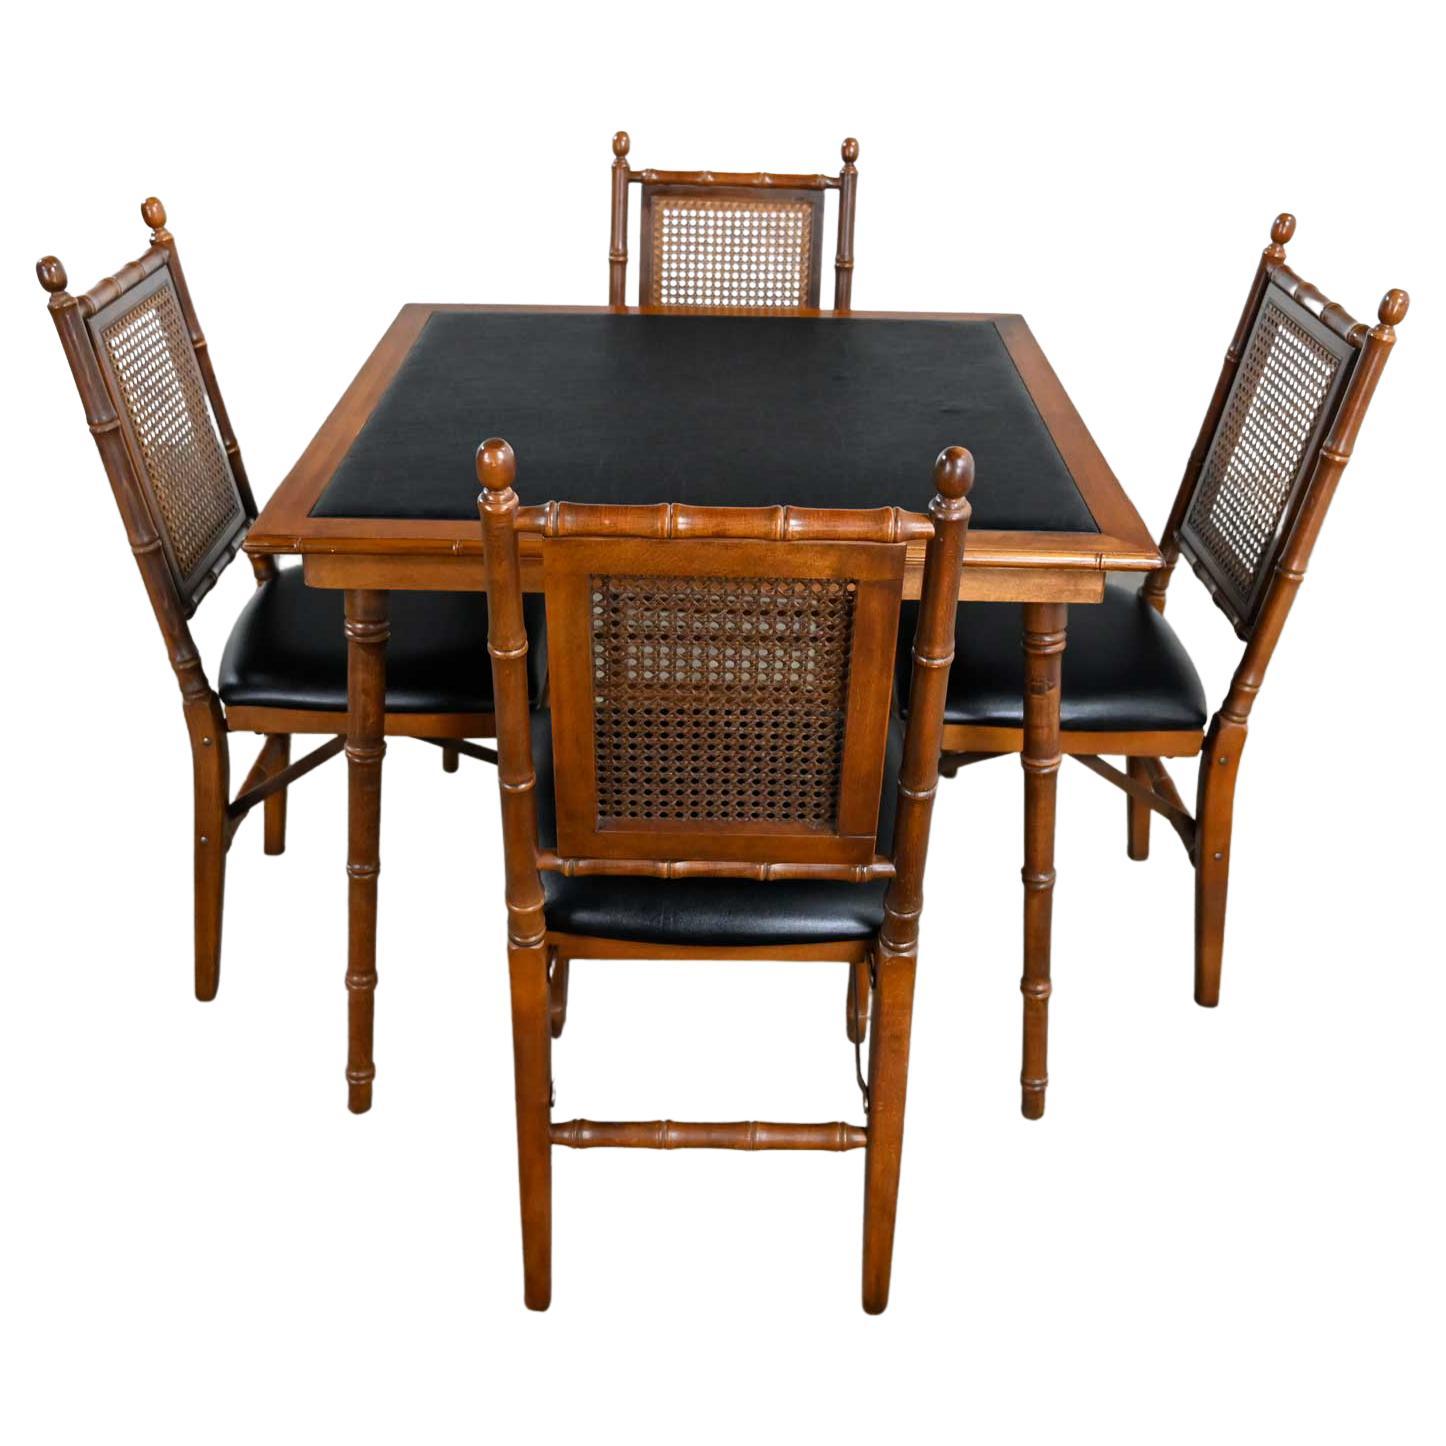 Vintage Stakmore Campaign Style Faux Bamboo Folding Table 4 Chairs Faux Leather